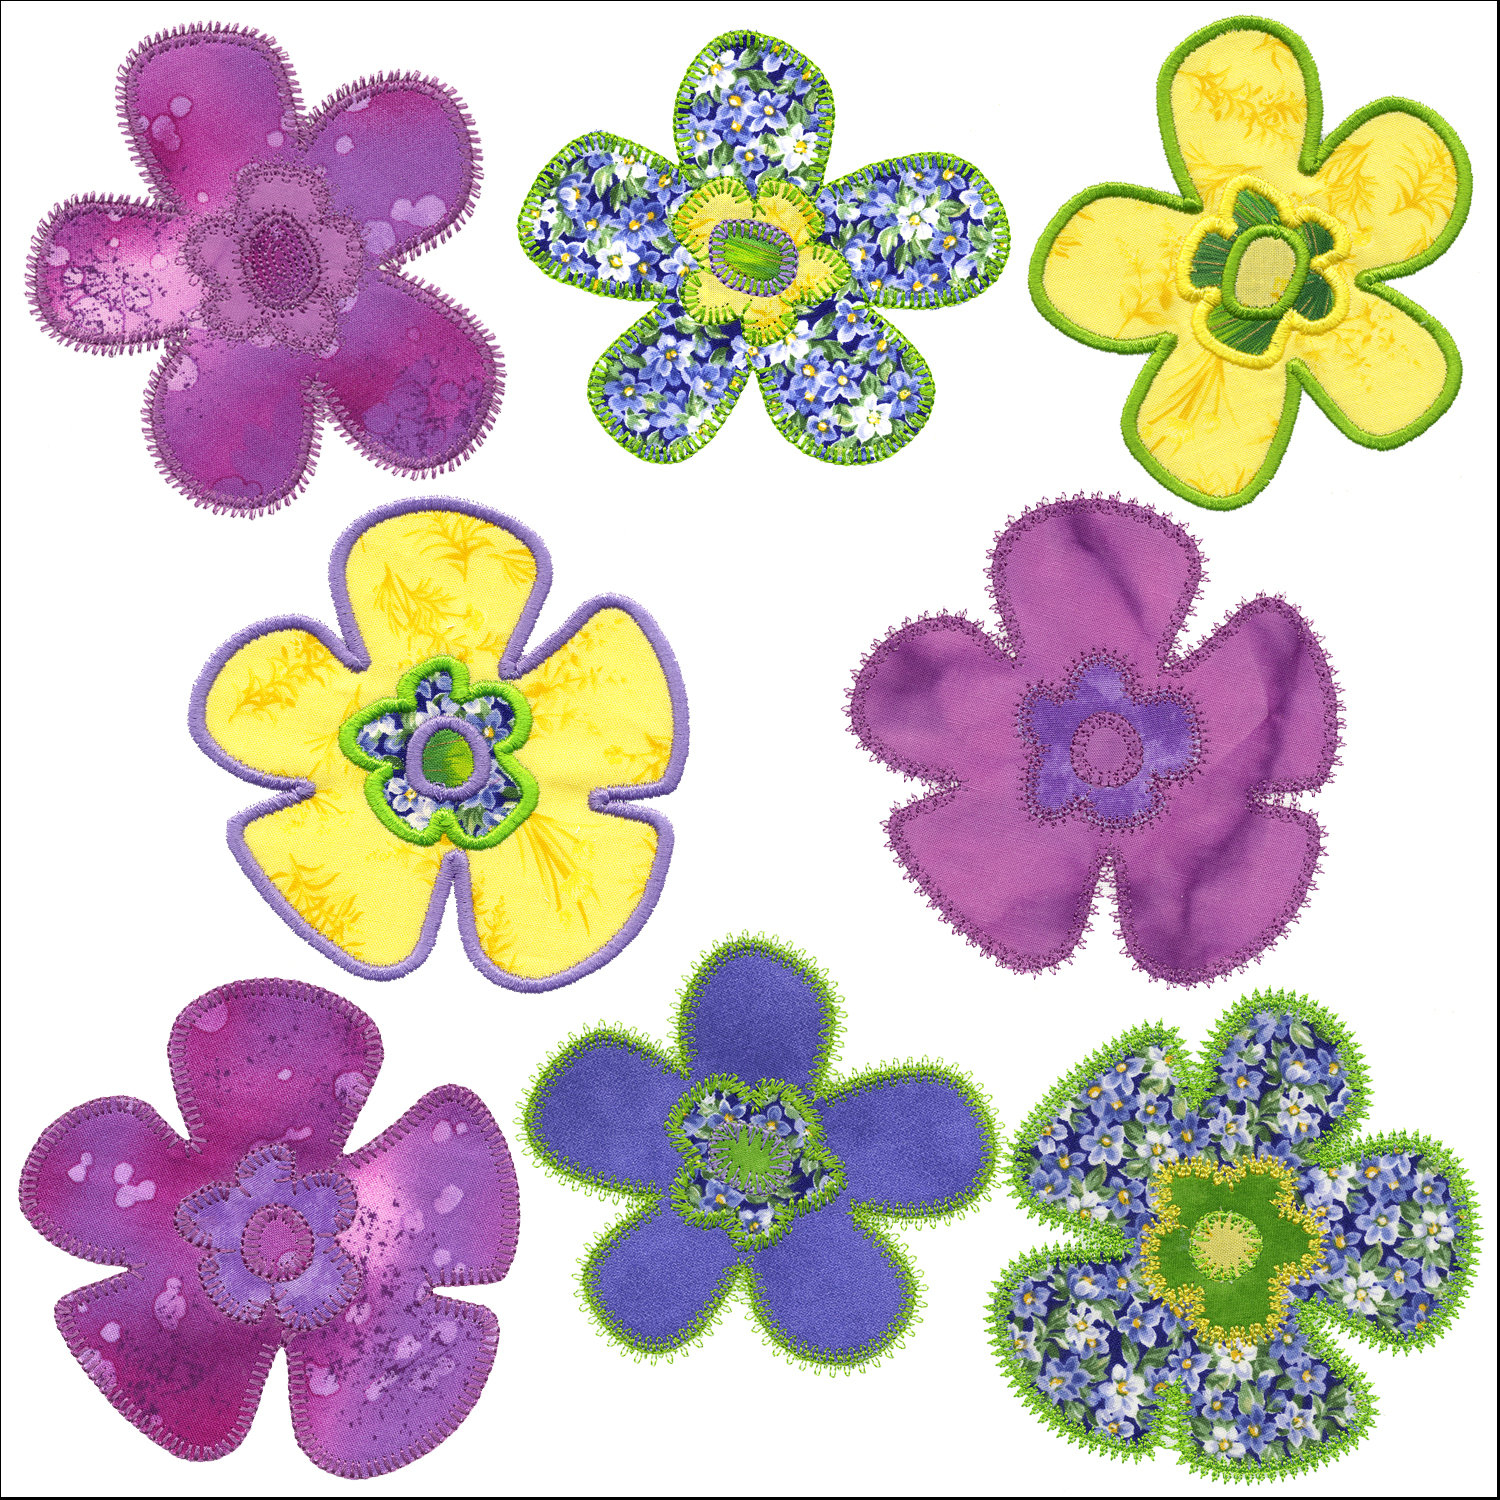 Funky Embroidery Patterns Set Of Funky Flower Applique Machine Embroidery Designs Instant Download Now Available Hoop Size Is 45 X 45 Or Larger